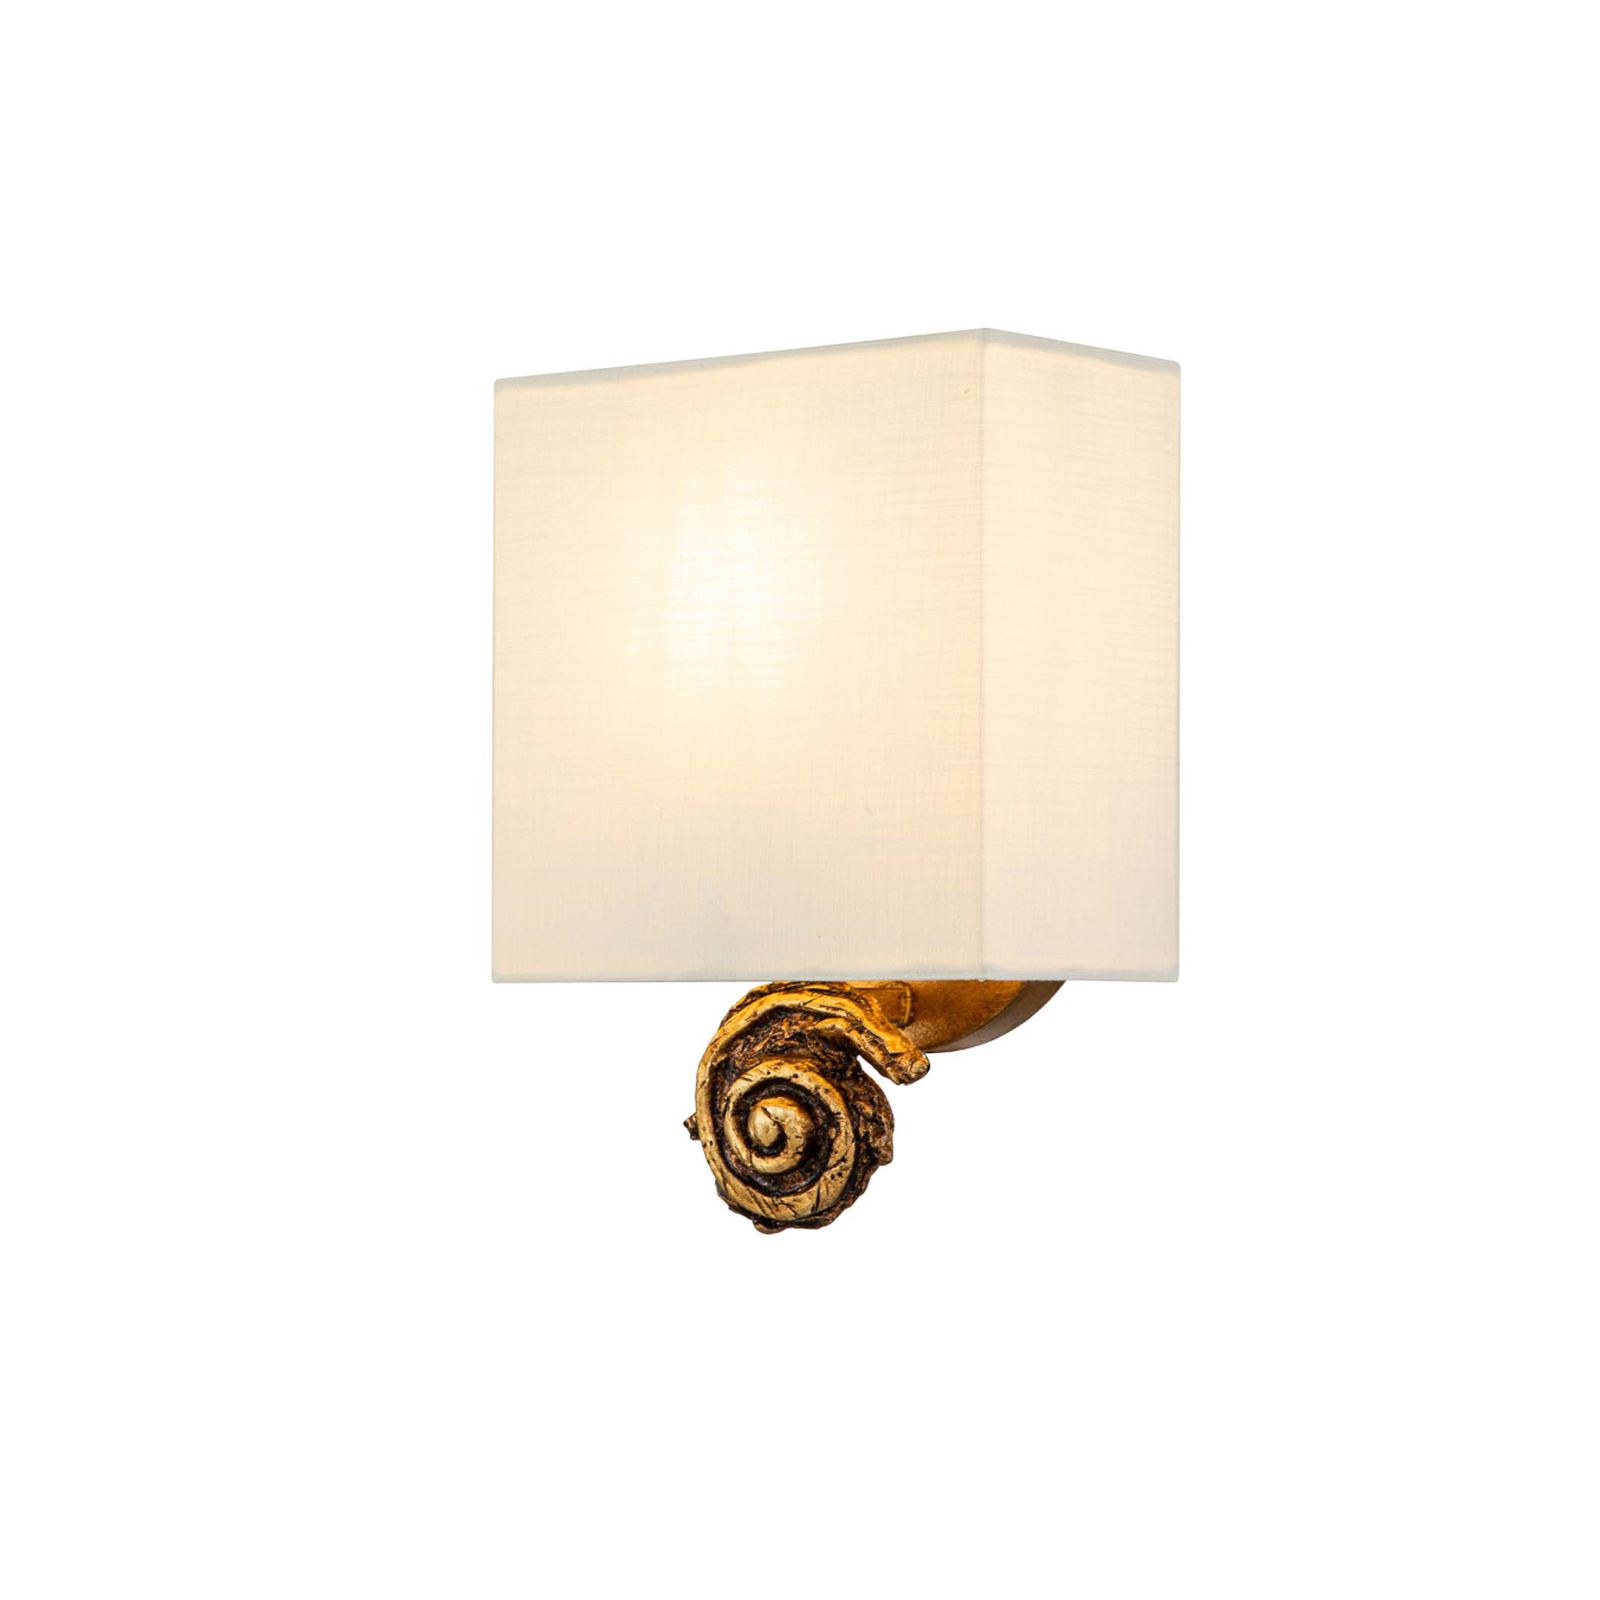 Wall light Swirl Small with linen shade, gold-coloured foil finish